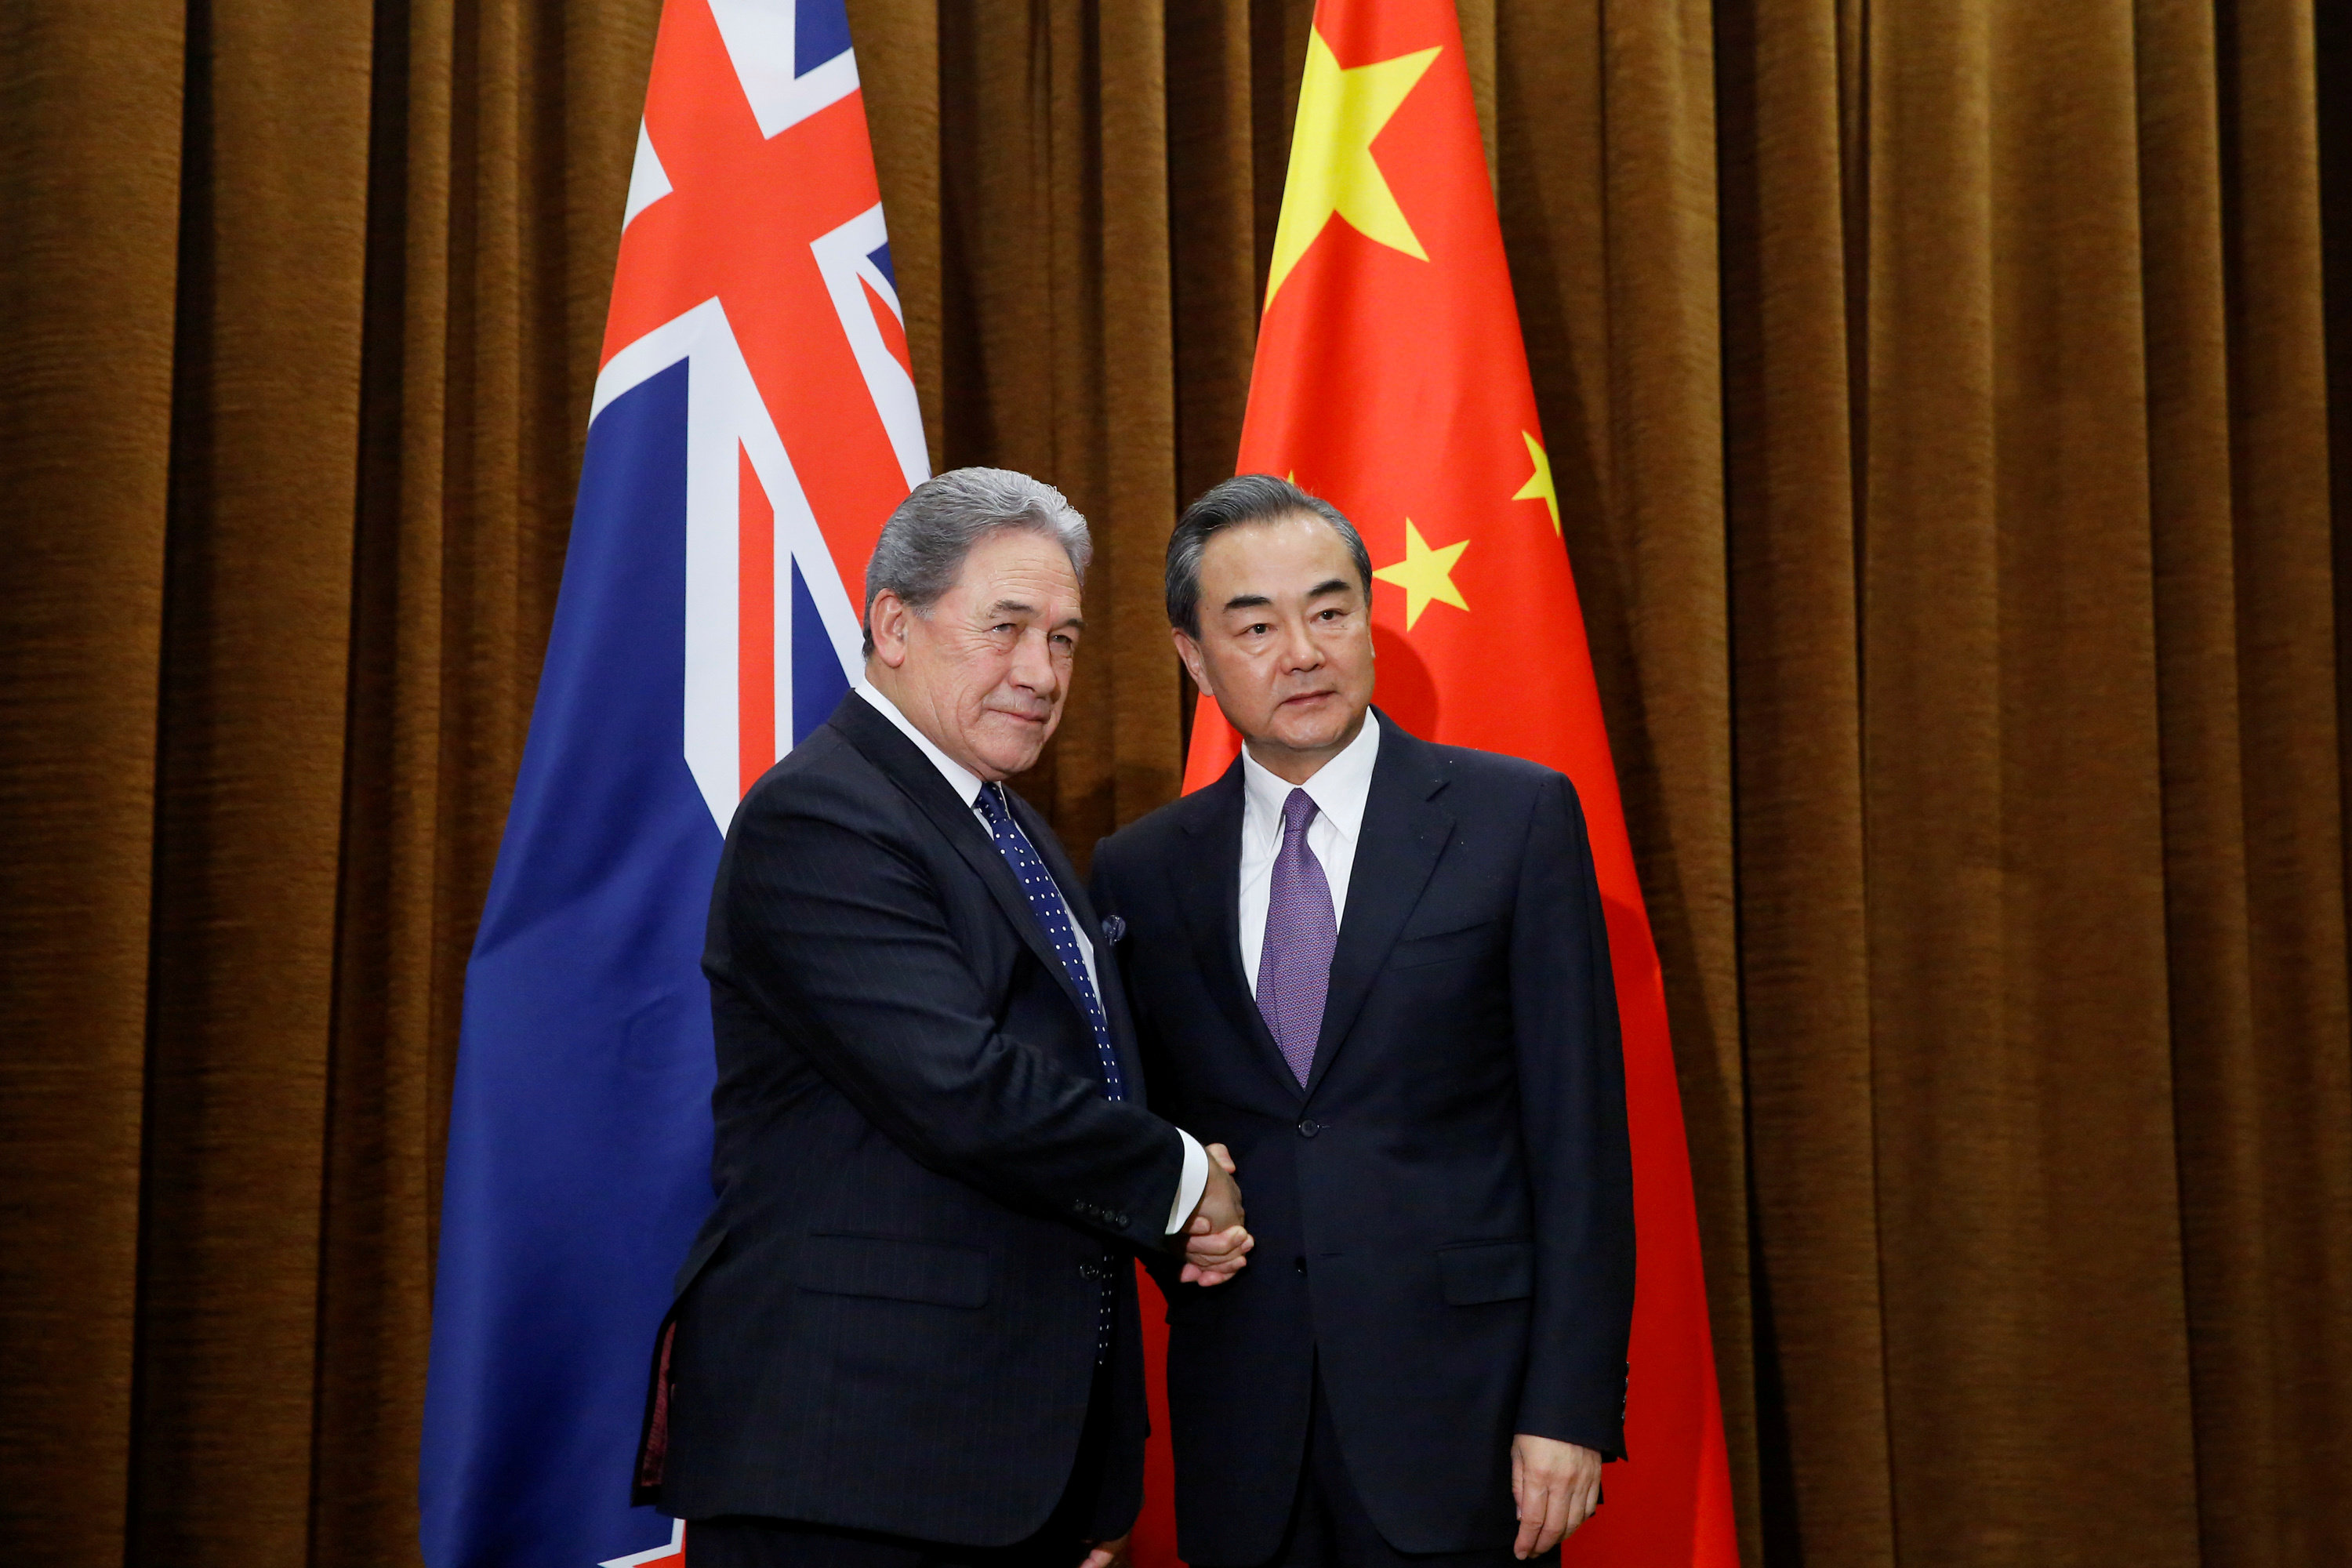 Foreign Minister Wang Yi meets New Zealand’s Foreign Minister Winston Peters in Beijing on May 25, 2018. Photo: Reuters